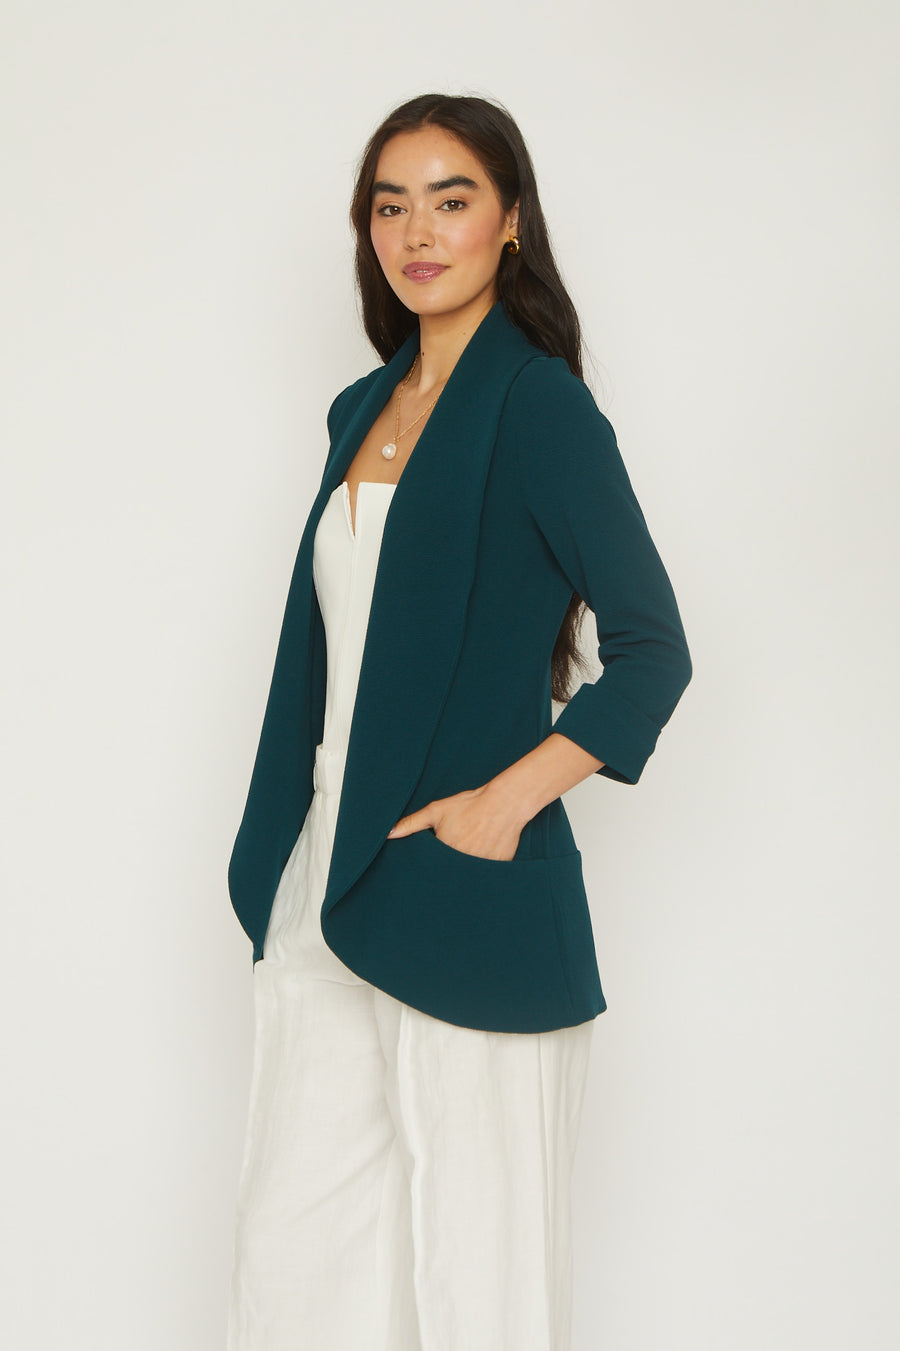 No Srcipt image - Images of 4 of 11 Melanie knit jacket, knit crepe fabric, 3/4 sleeve length, open front , shawl collar, front pocket, soft and stretch, teal color